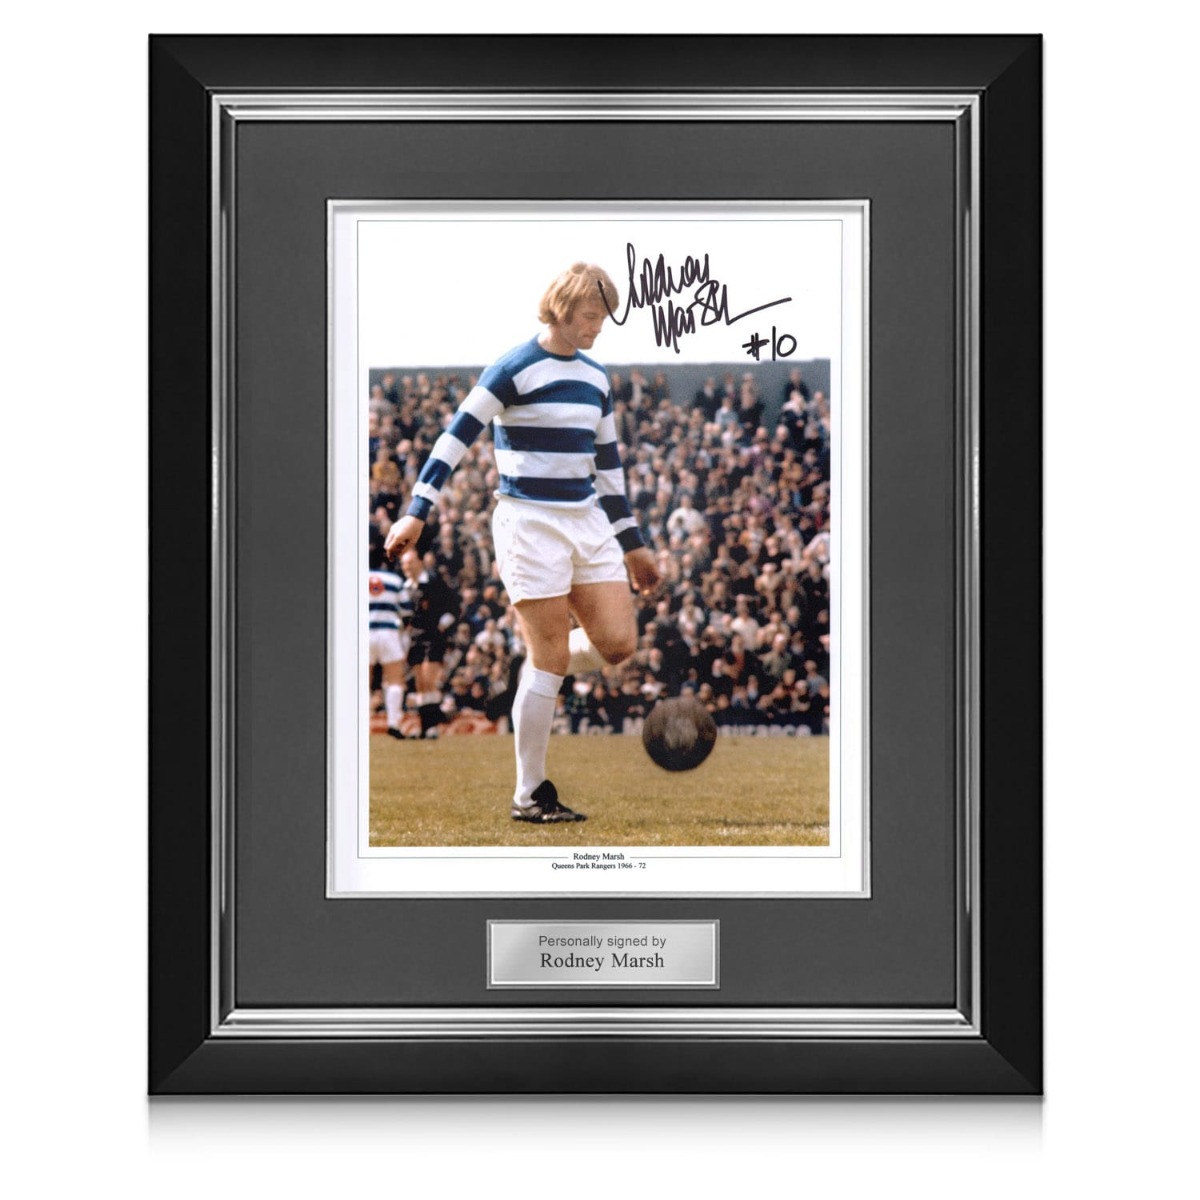 Rodney Marsh Queens Park Rangers Signed And Framed Football 12x16 Photo 